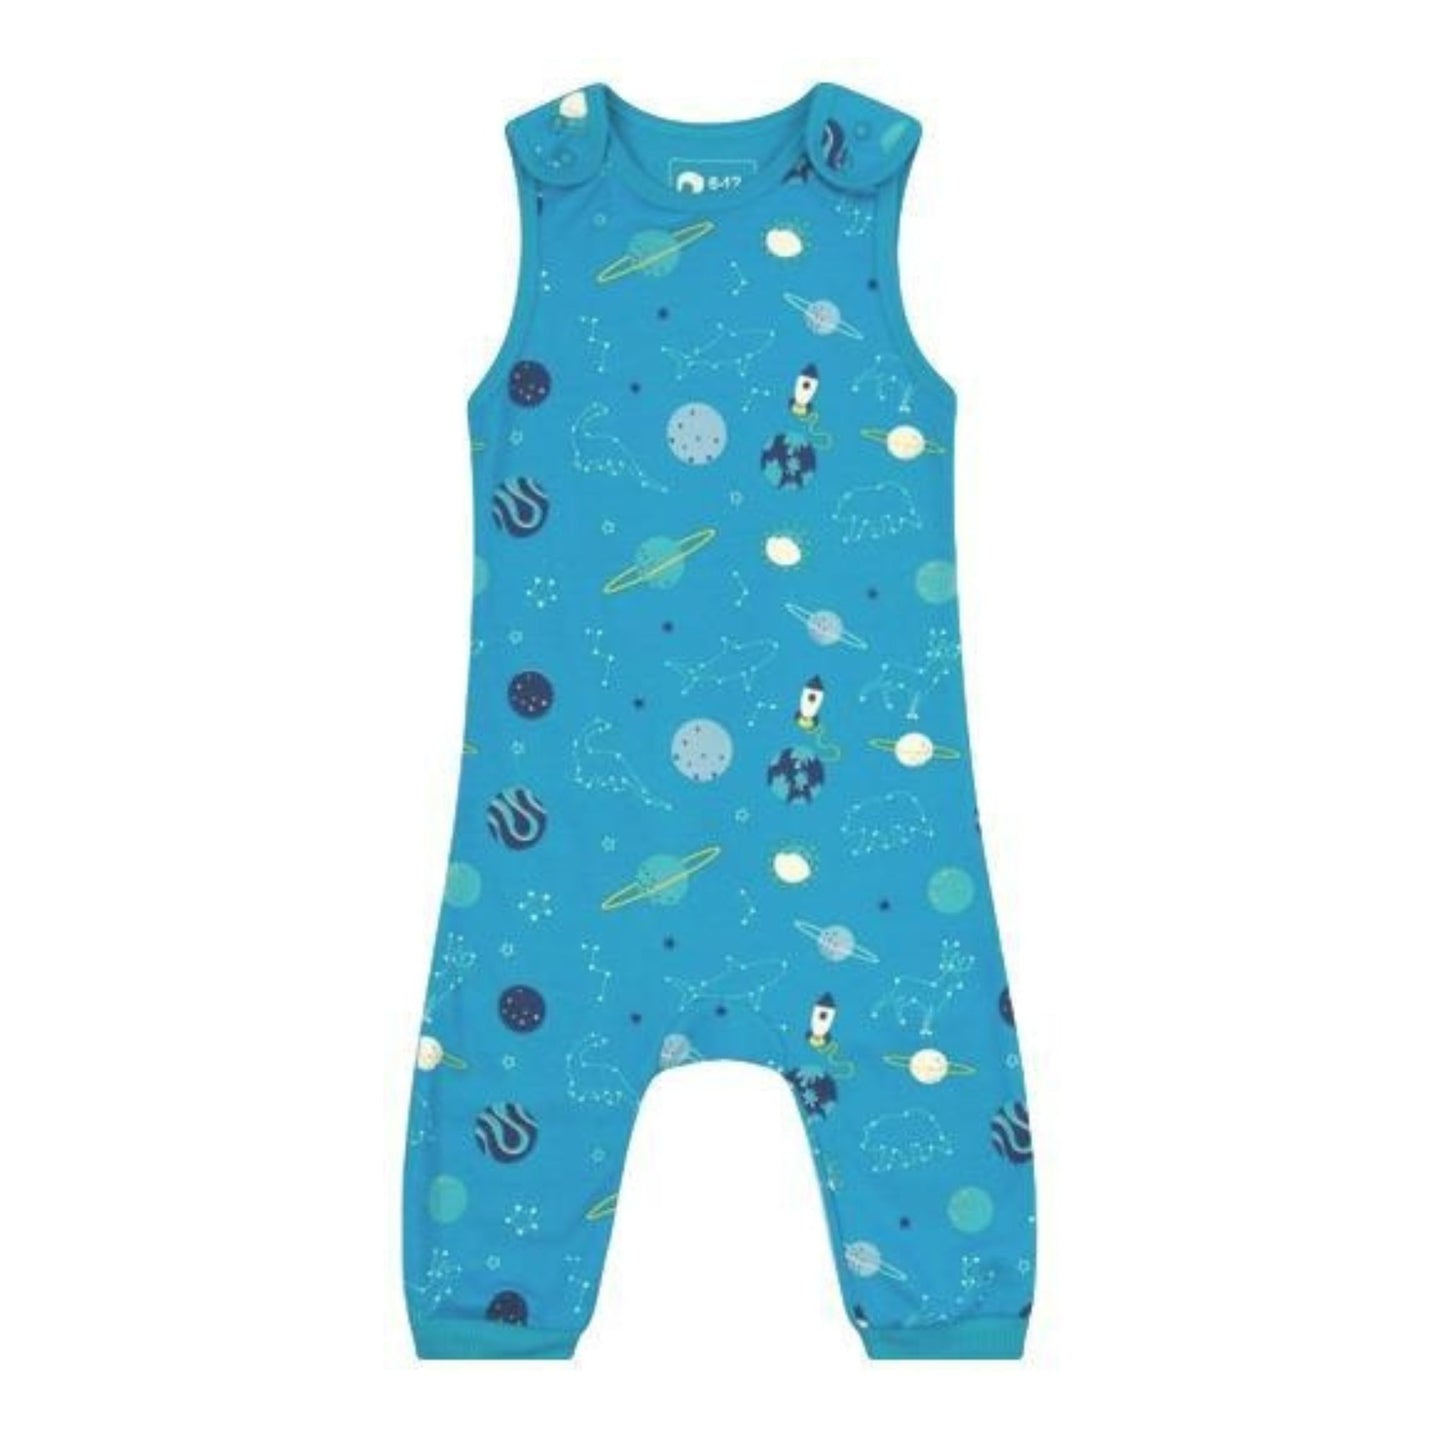 Space dungarees